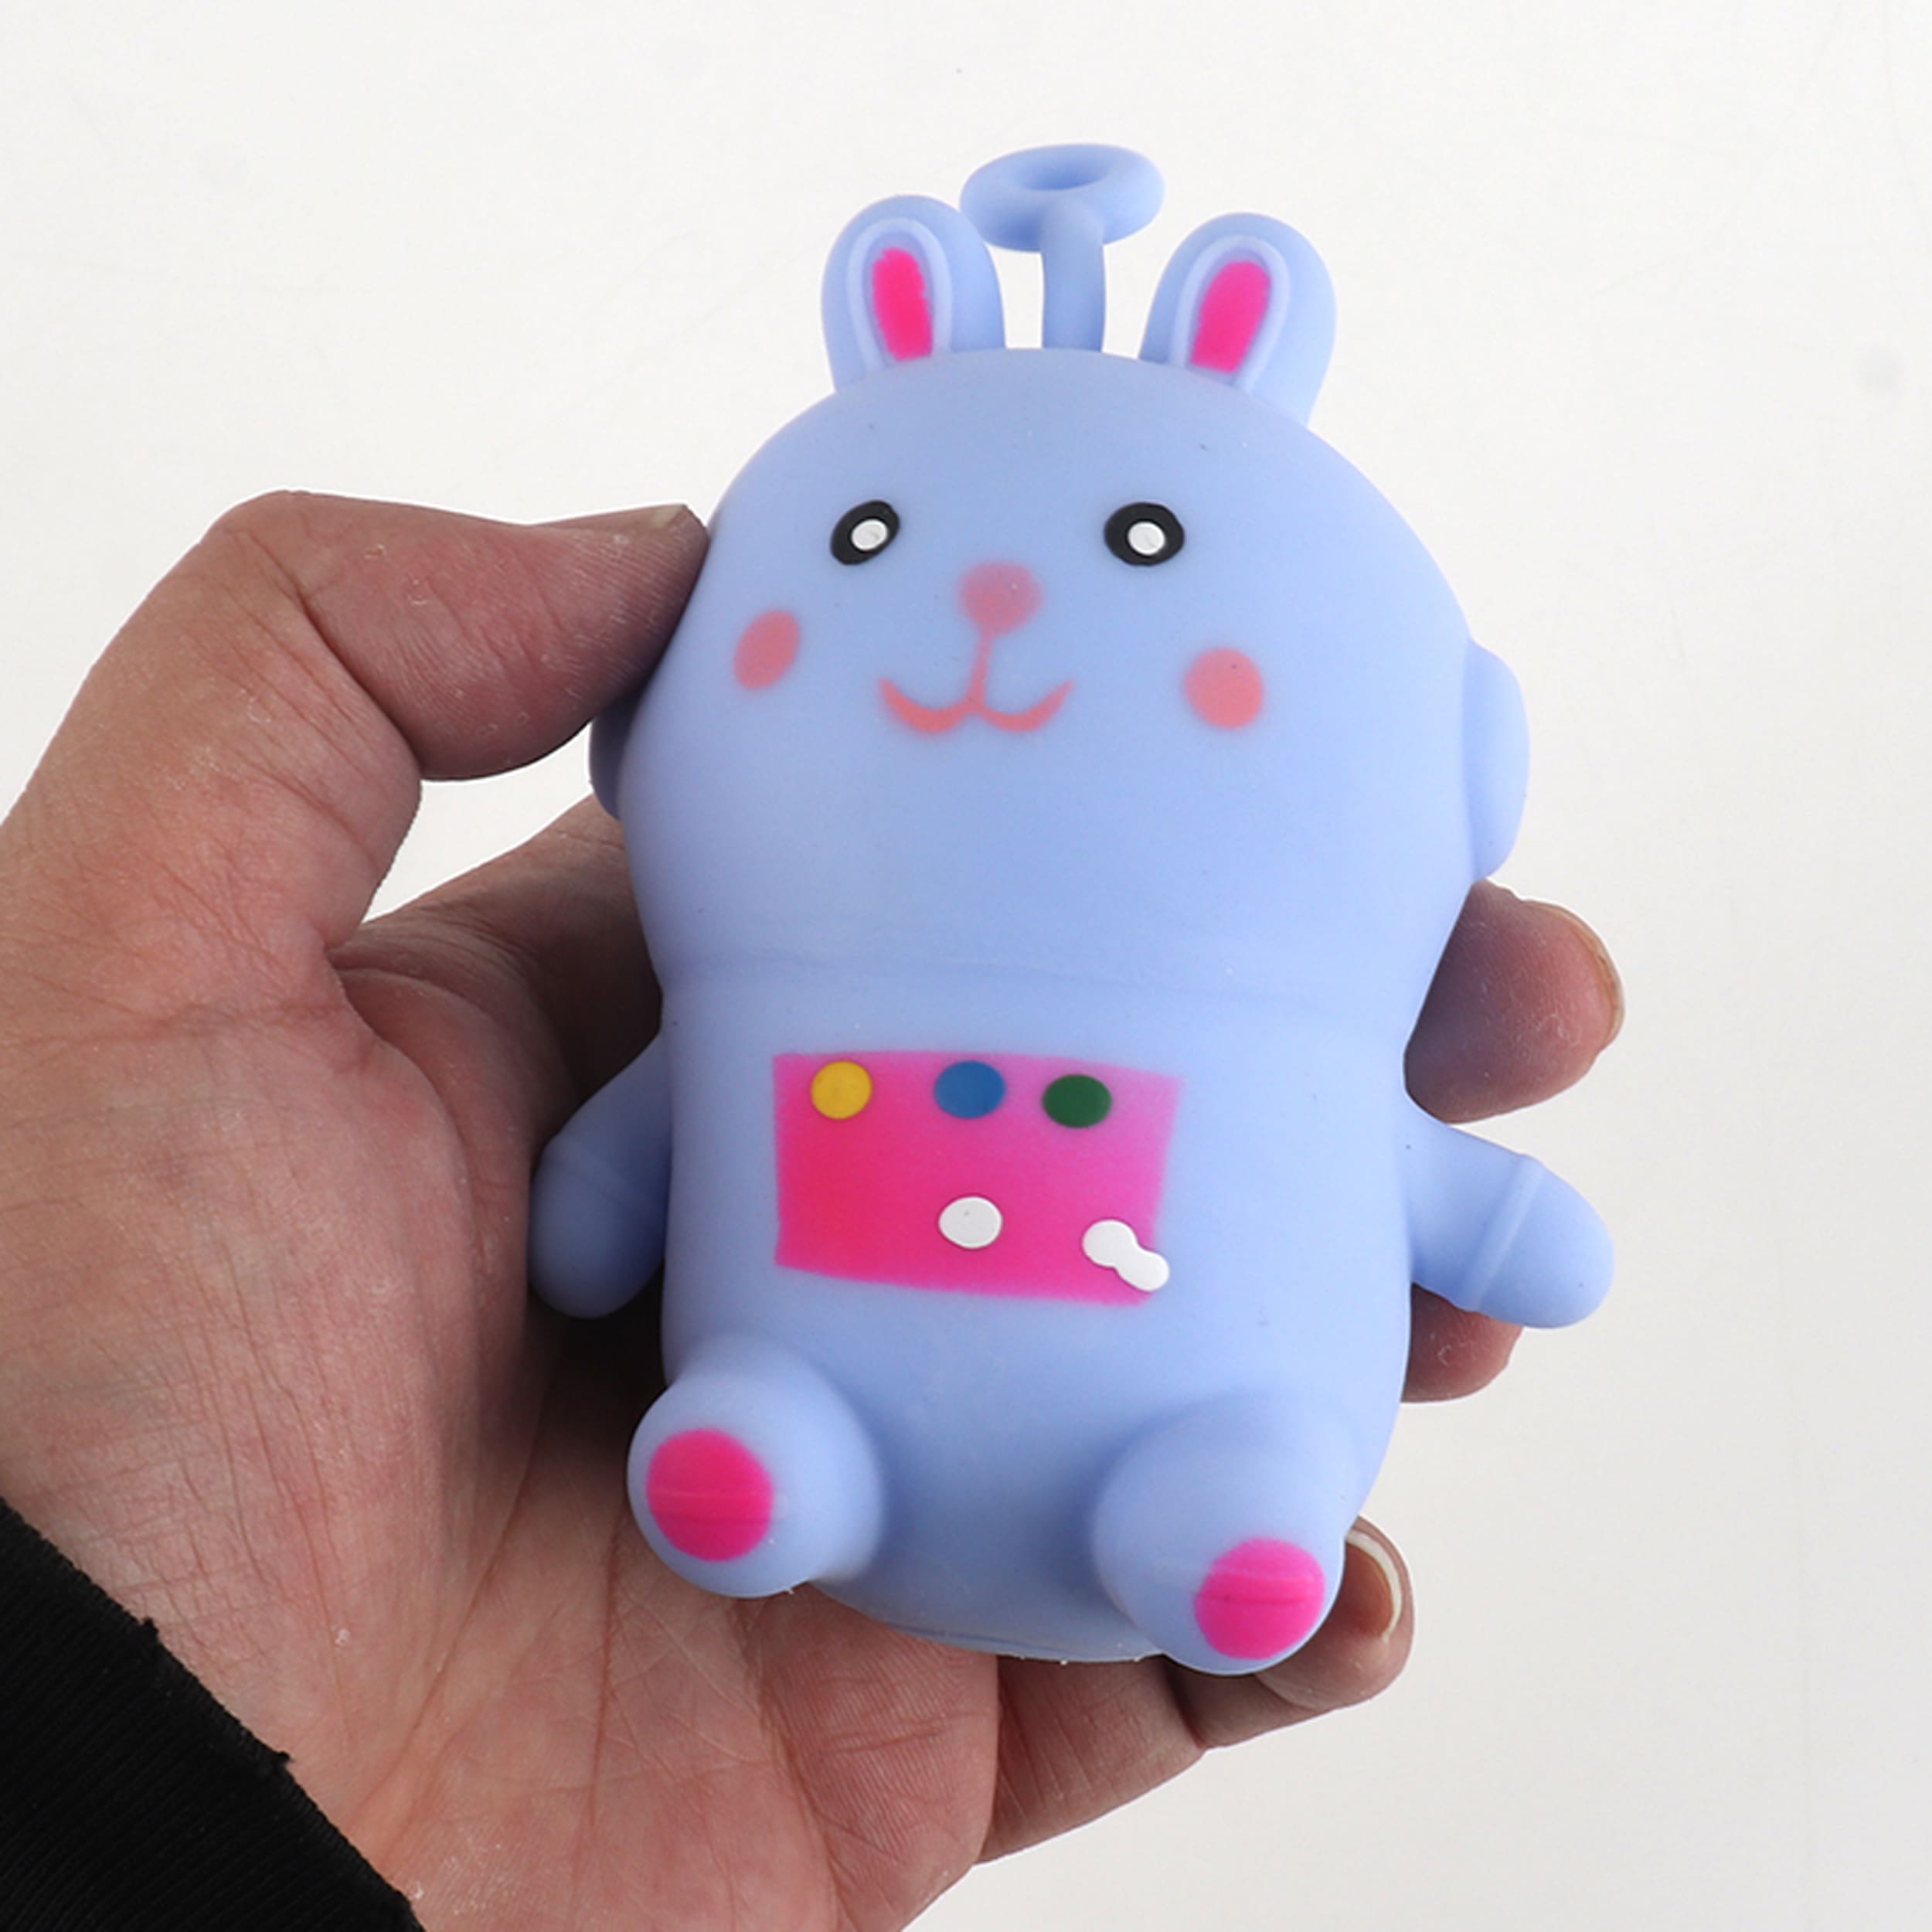 Get Your Hands on Our Cute Teddy Bear Squeeze Toys With Pull Style